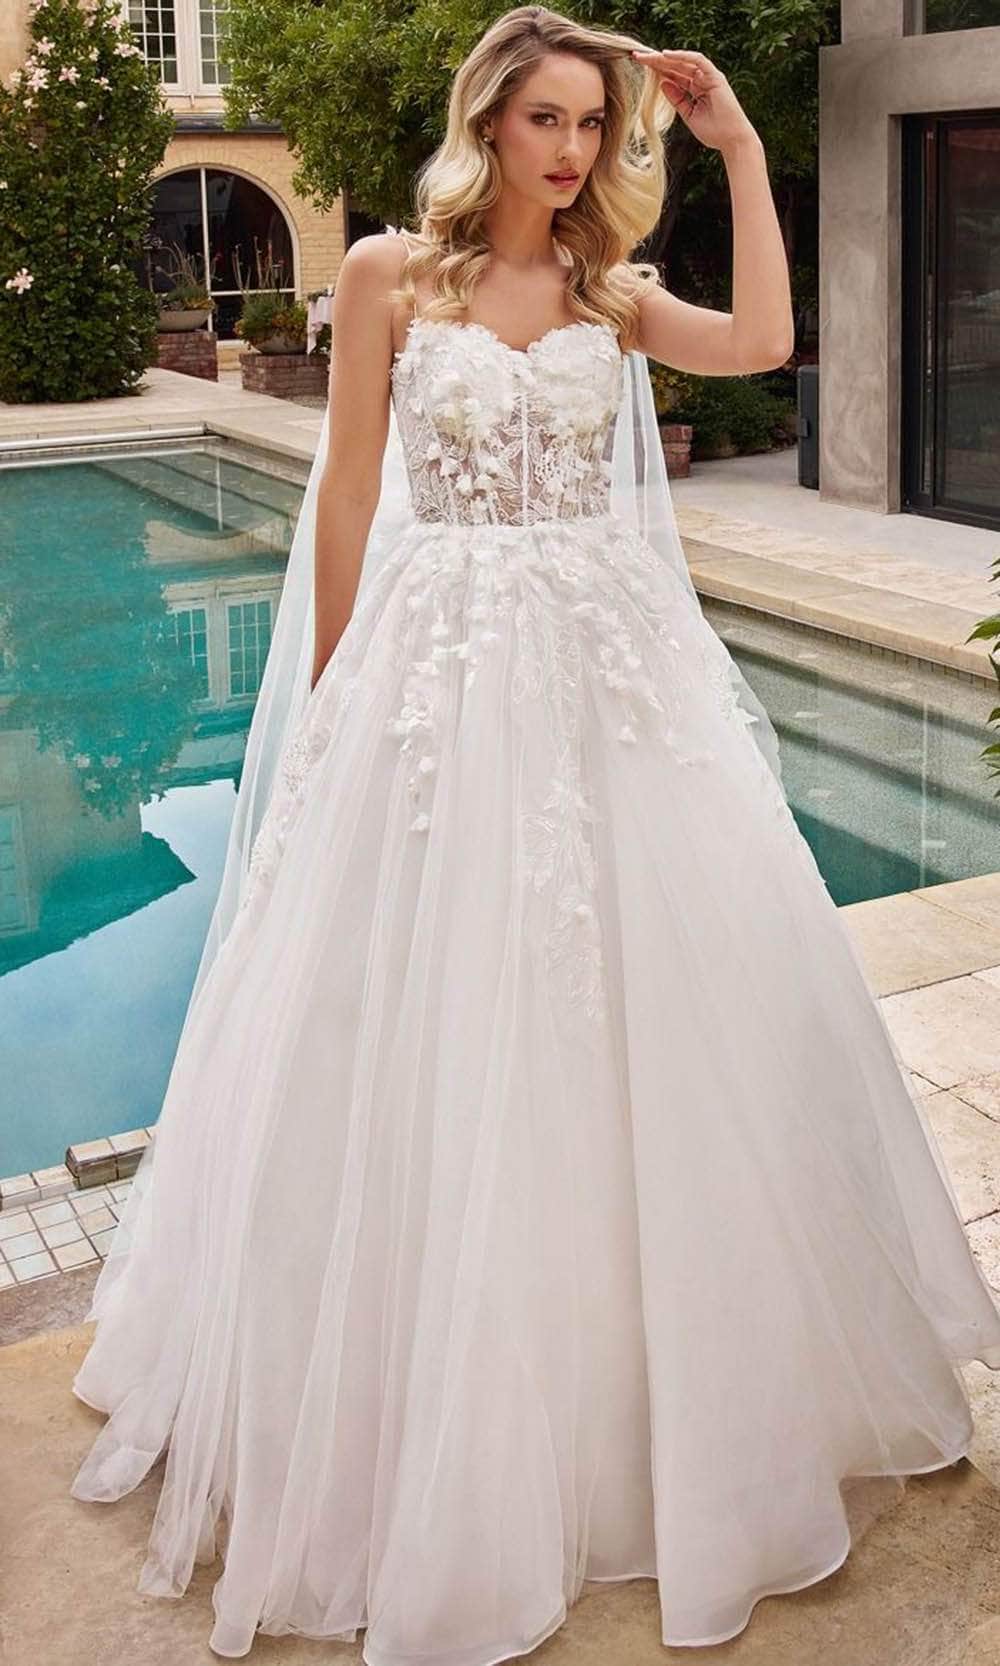 Image of Ladivine CDS437W - Sleeveless Layered Tulle Bridal Gown